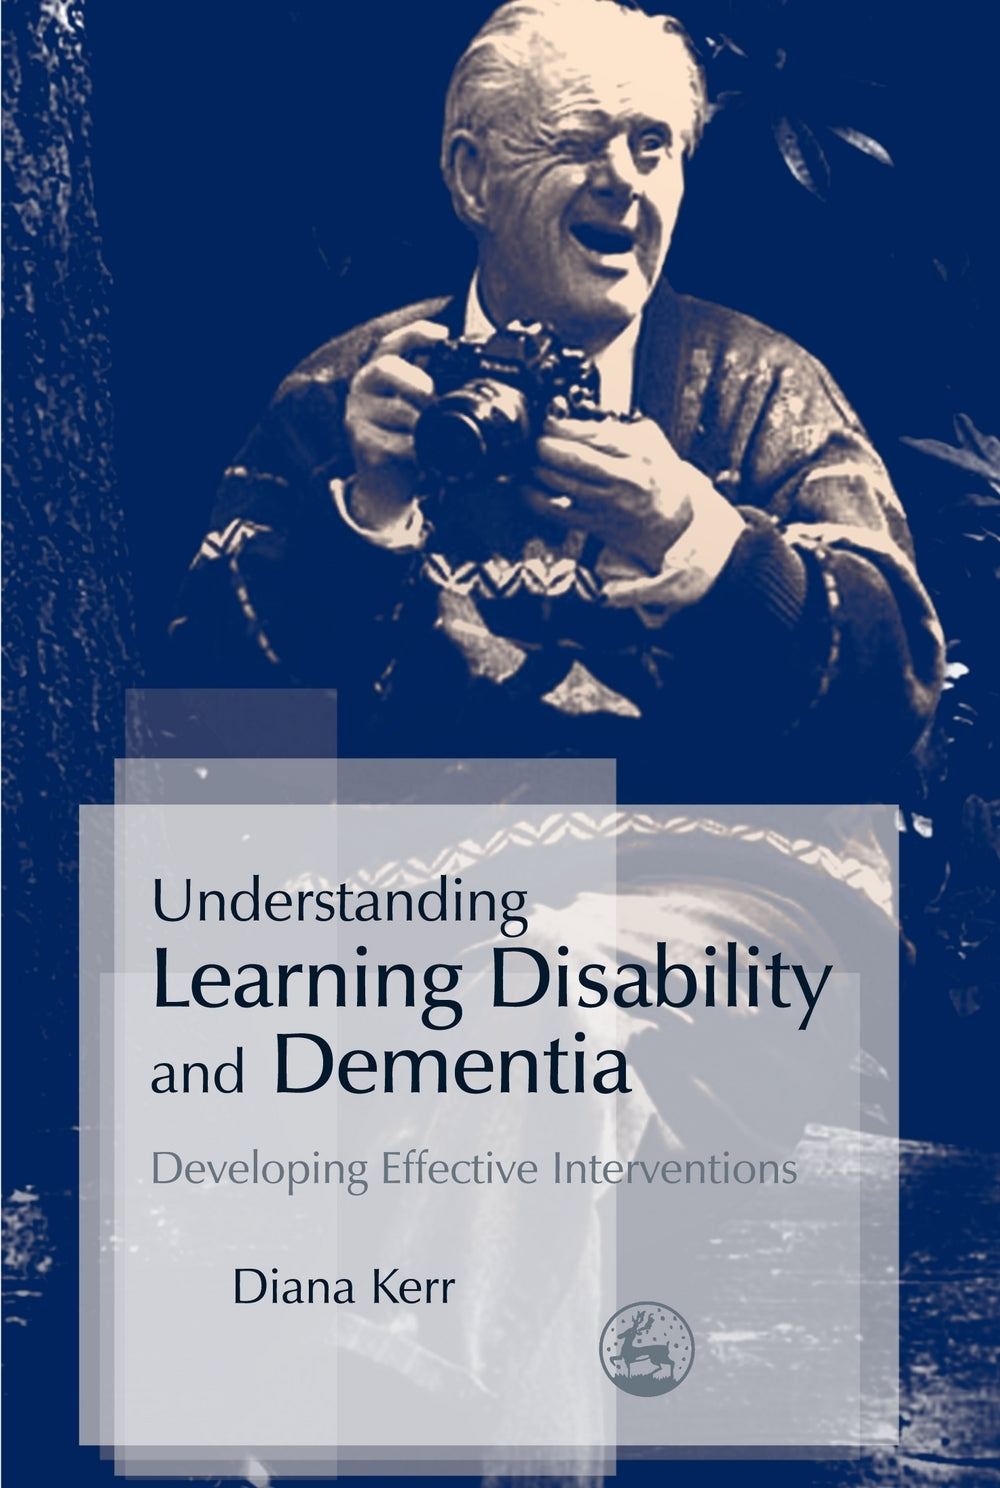 Understanding Learning Disability and Dementia by Diana Kerr